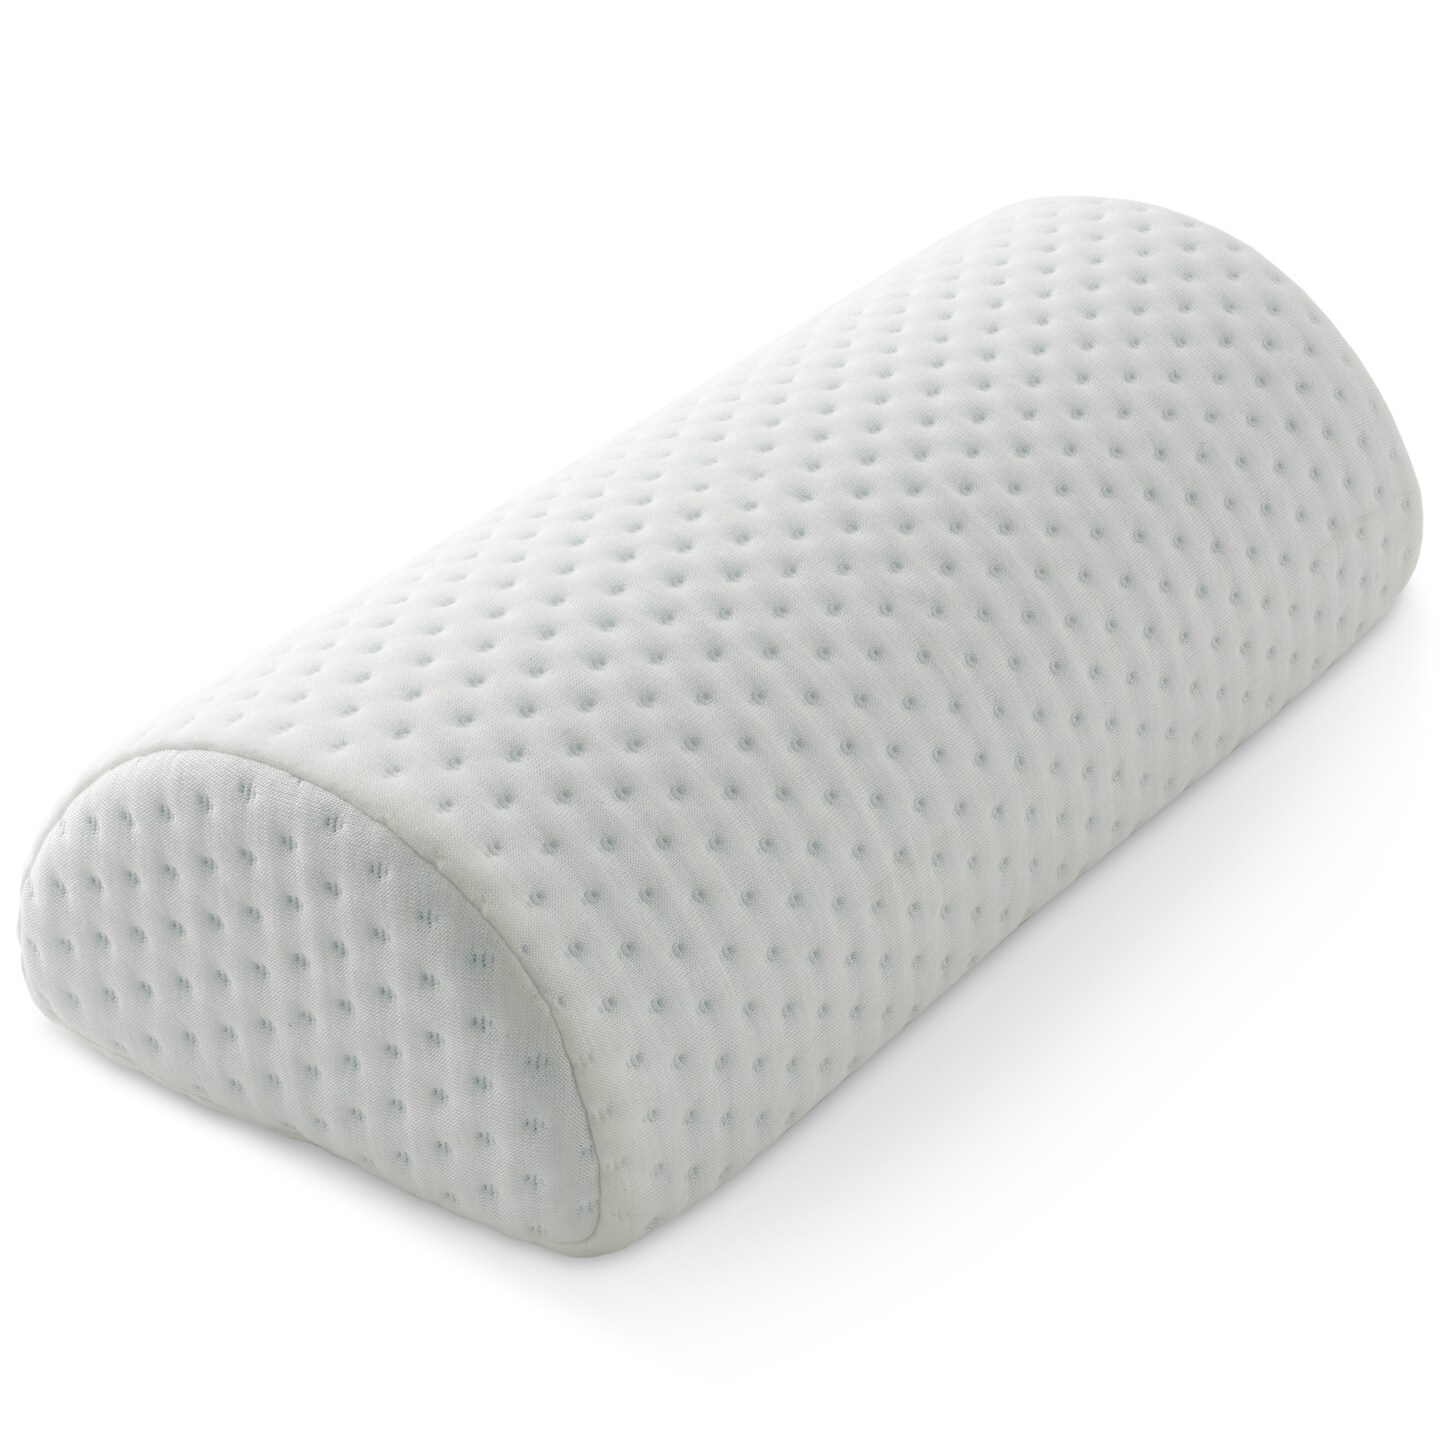 Made Medical Memory Foam Pillow, Support for Neck, Legs, Back and Spine During Sleep